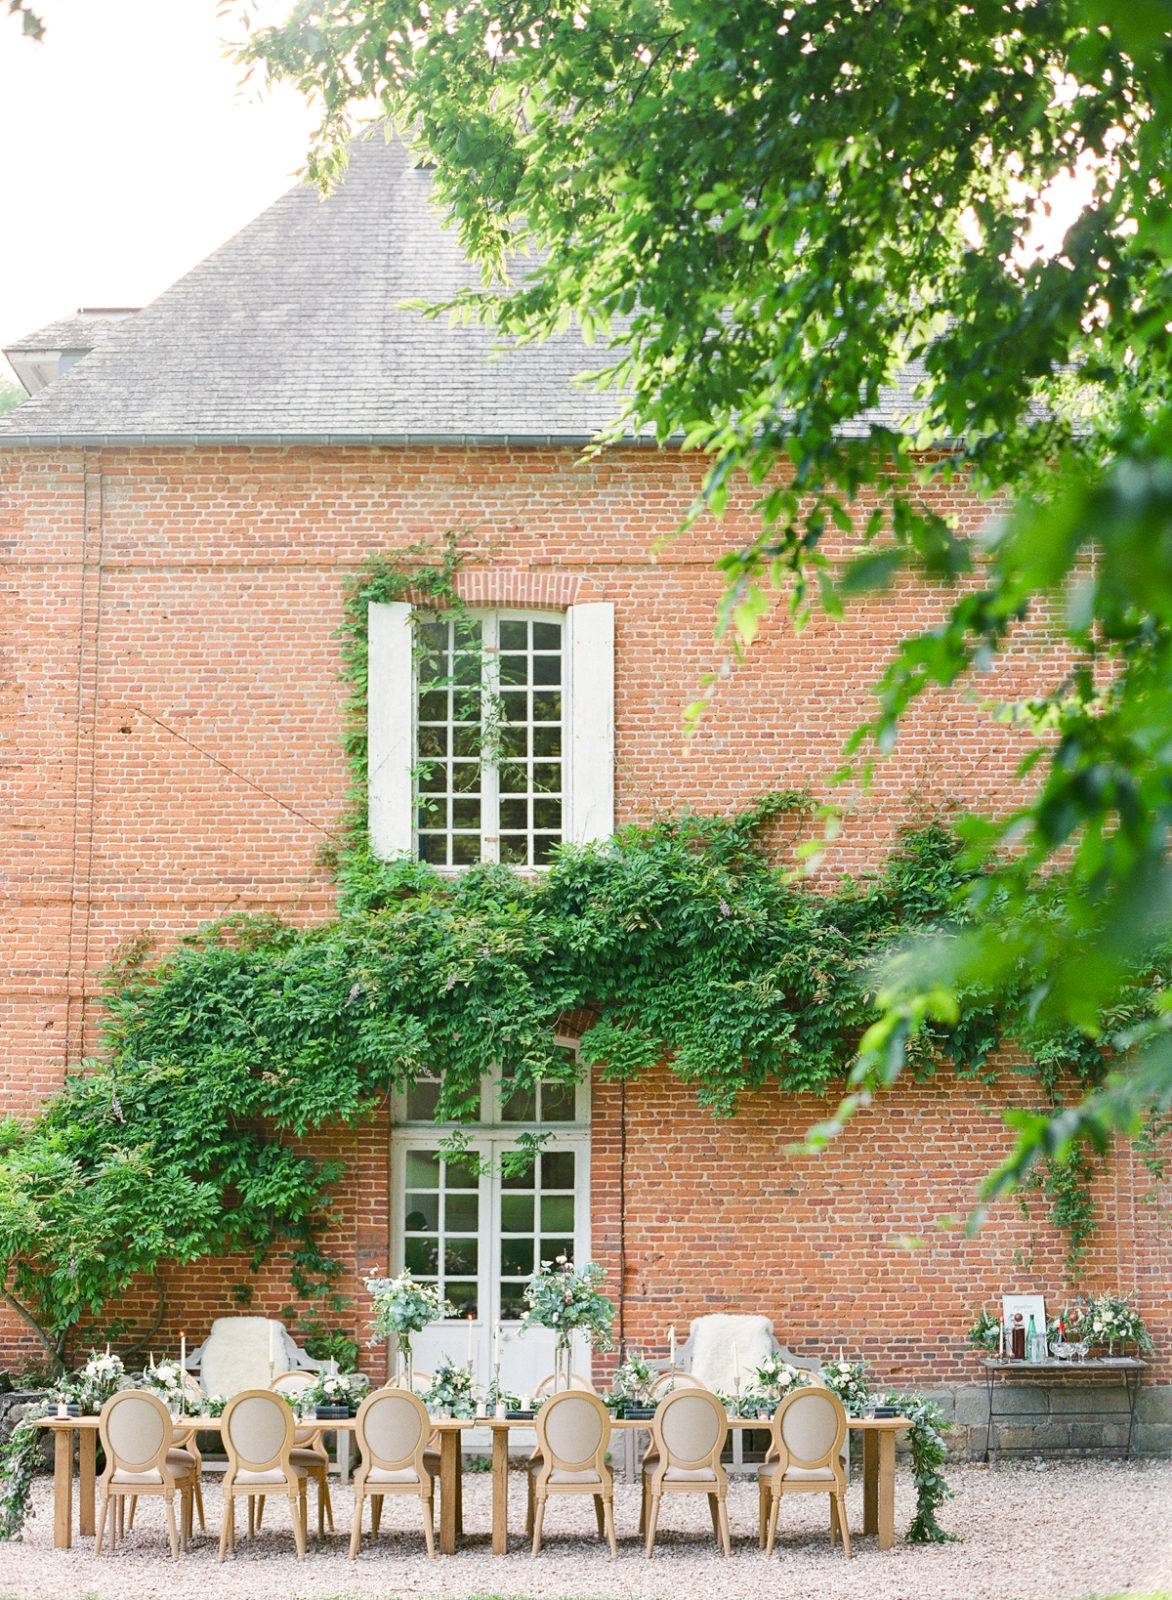 Normandy Wedding Photographer | France Destination Wedding | Molly Carr Photography | Wedding Flowers with Trophy and Old Books